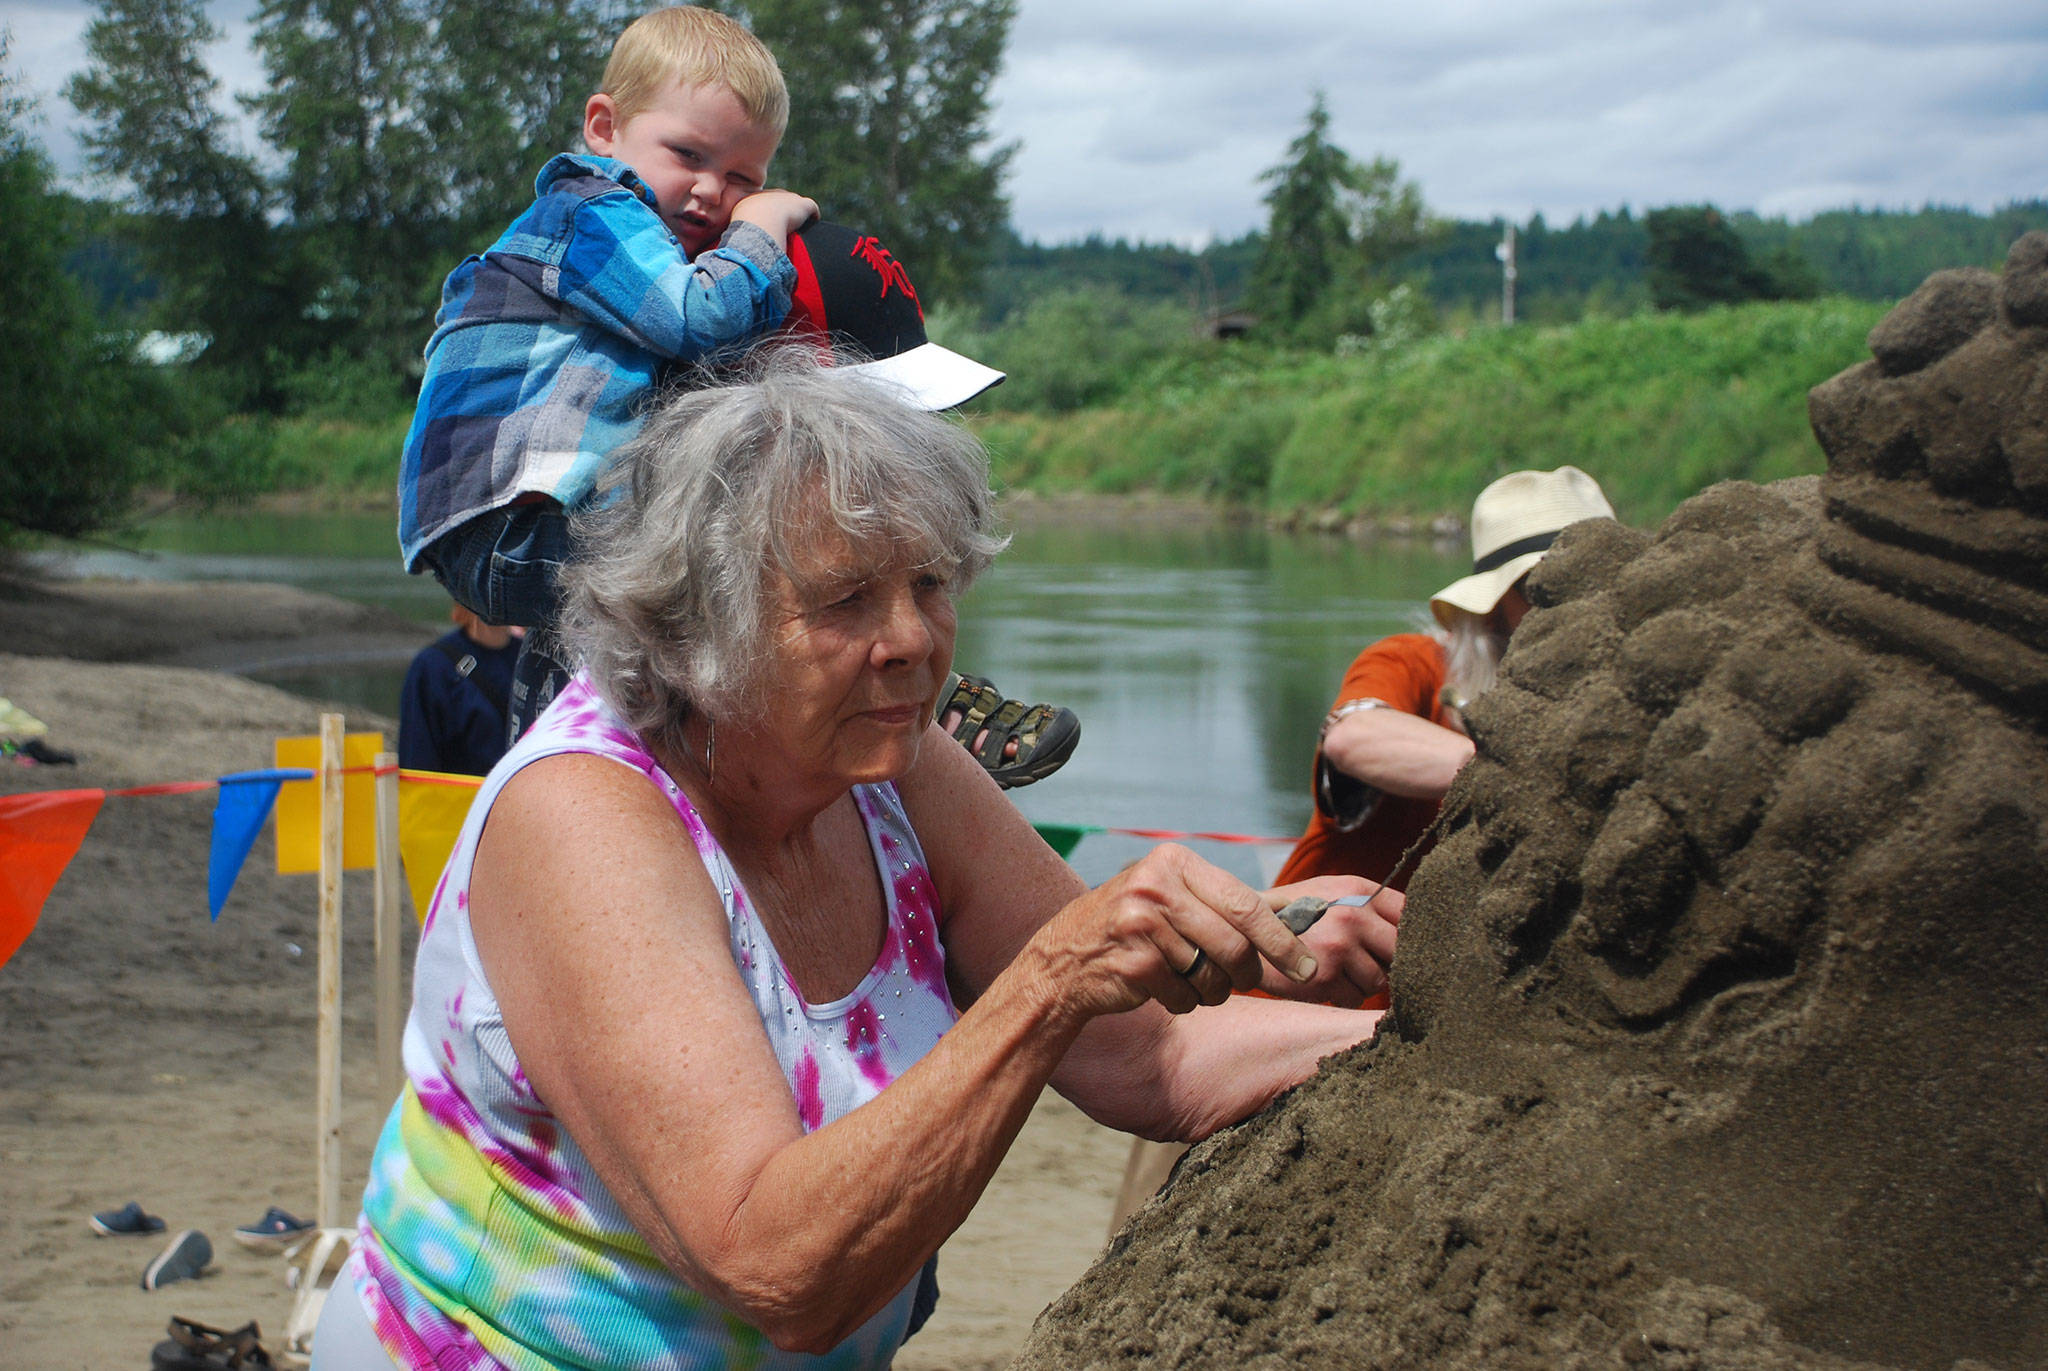 Local artist Kali Bradford plans to create an 8-foot sand sculpture for the Reach and Row and Waterfront Day event Saturday at John Wayne Marina.